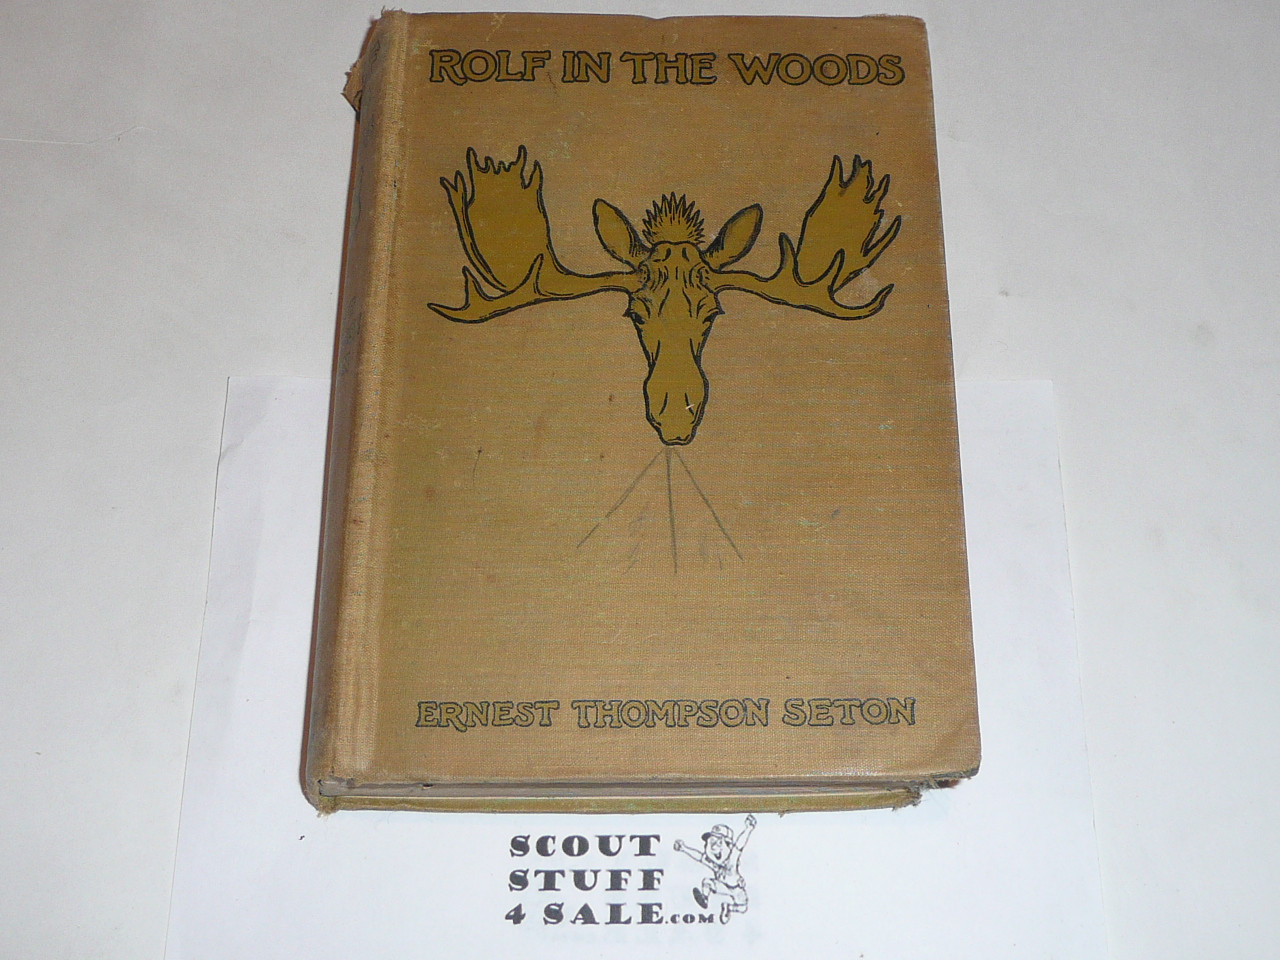 1911 Rolf in the Woods, By Ernest Thompson Seton, first printing, dedicated to the Boy Scouts of America, some wear